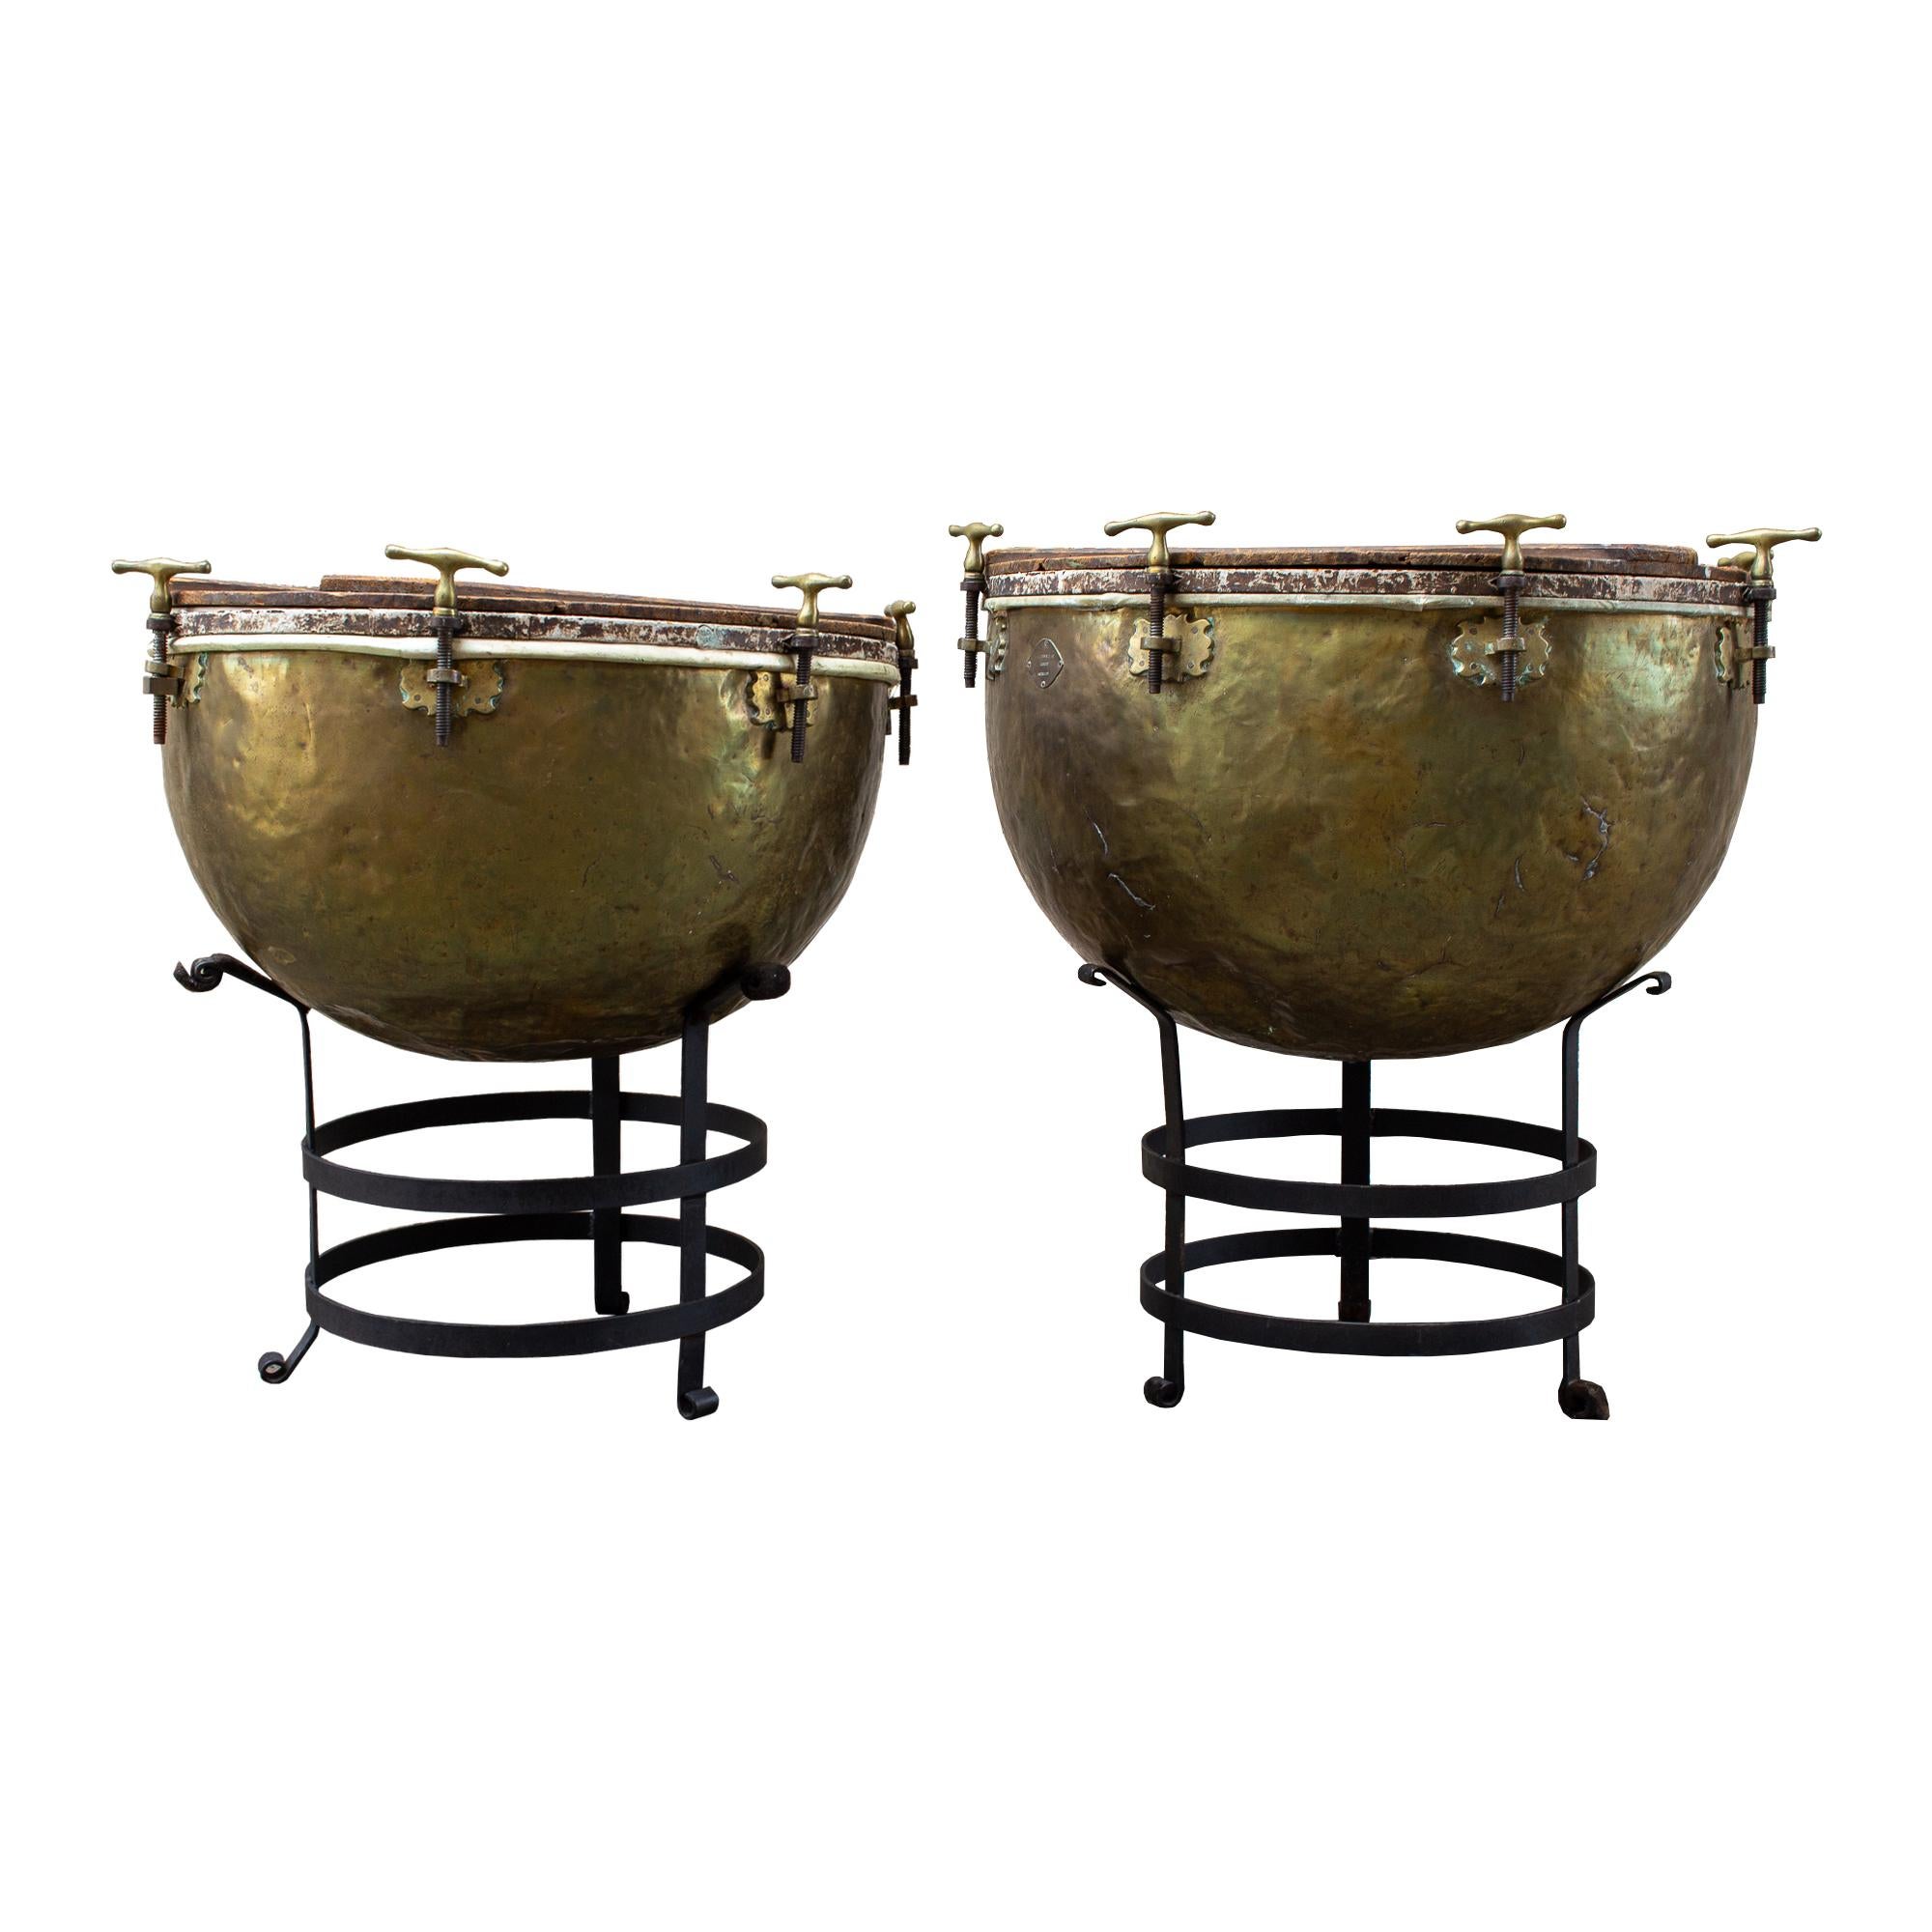 Discovered during our recent European travels, we instantly fell in love with this pairing of antique drums on iron stands crafted by noted musical instrument maker F. Van Cauwelaert from Belgium during the 19th century. Many of Van Cauwelart's